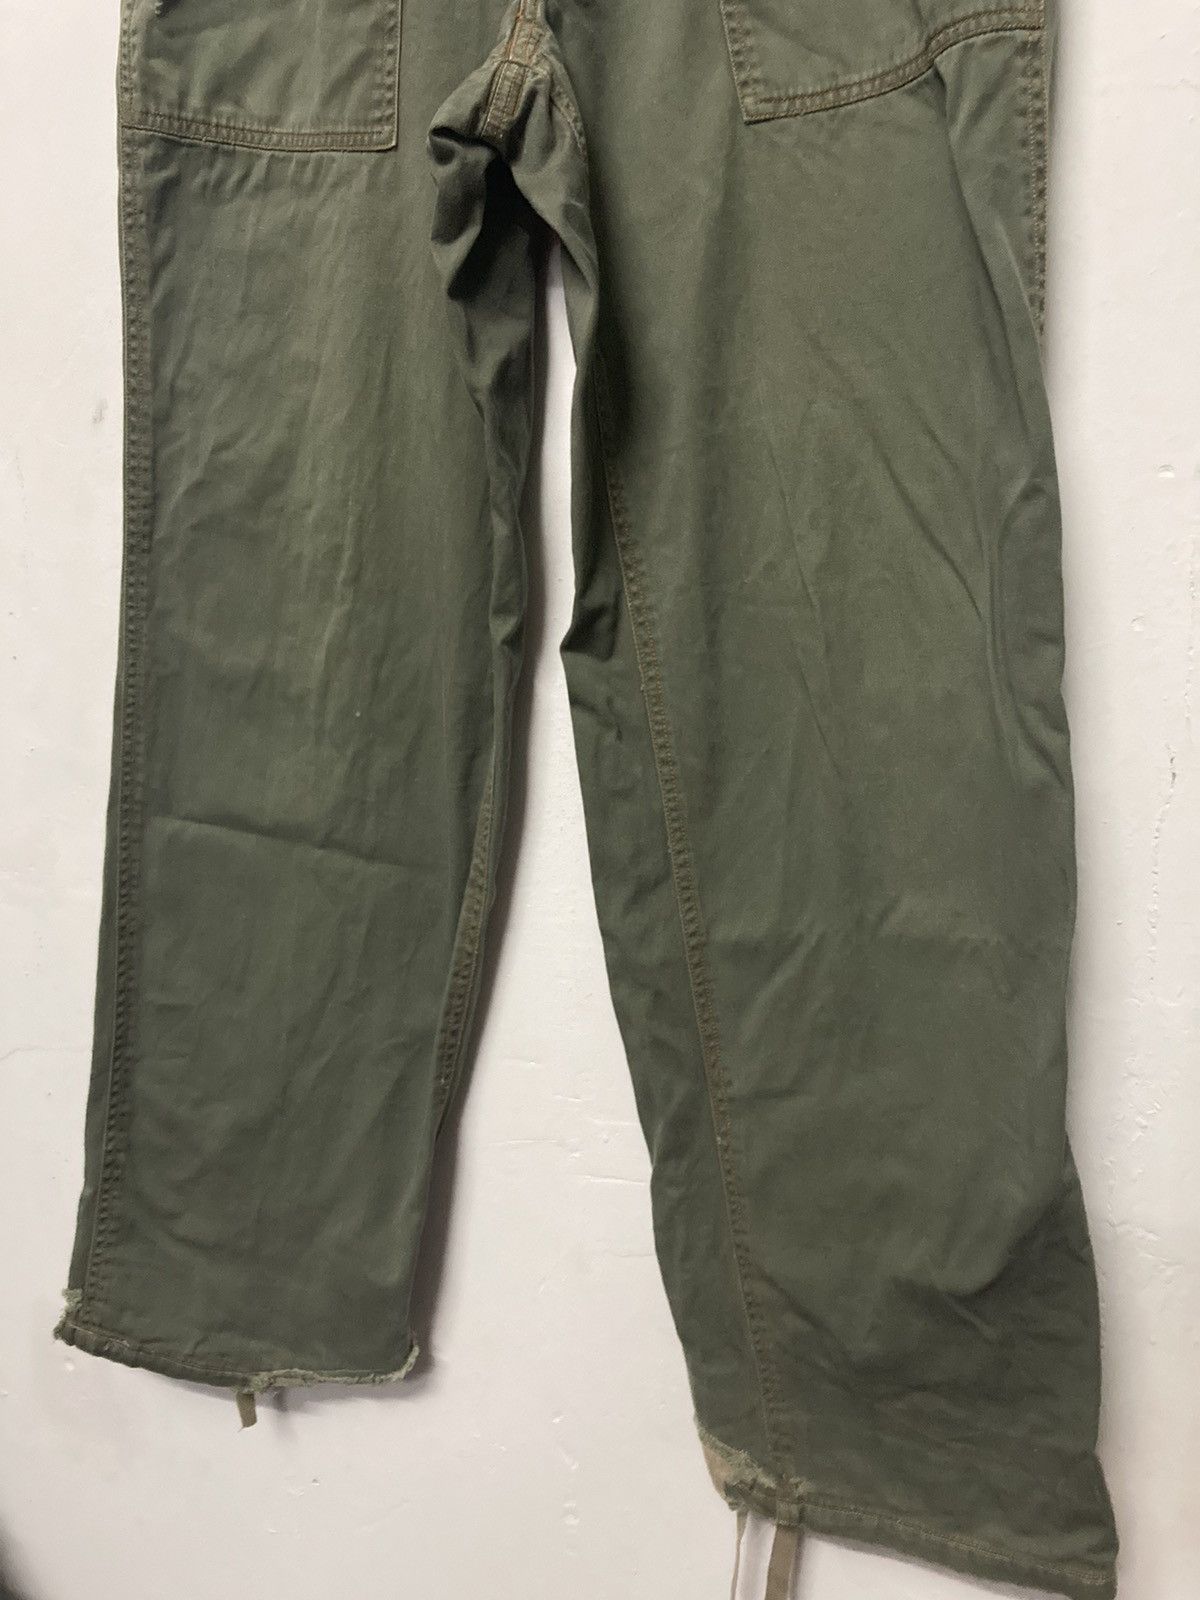 Vintage Soldout Japanese Brand Large Pocket Army Style Pants - 5